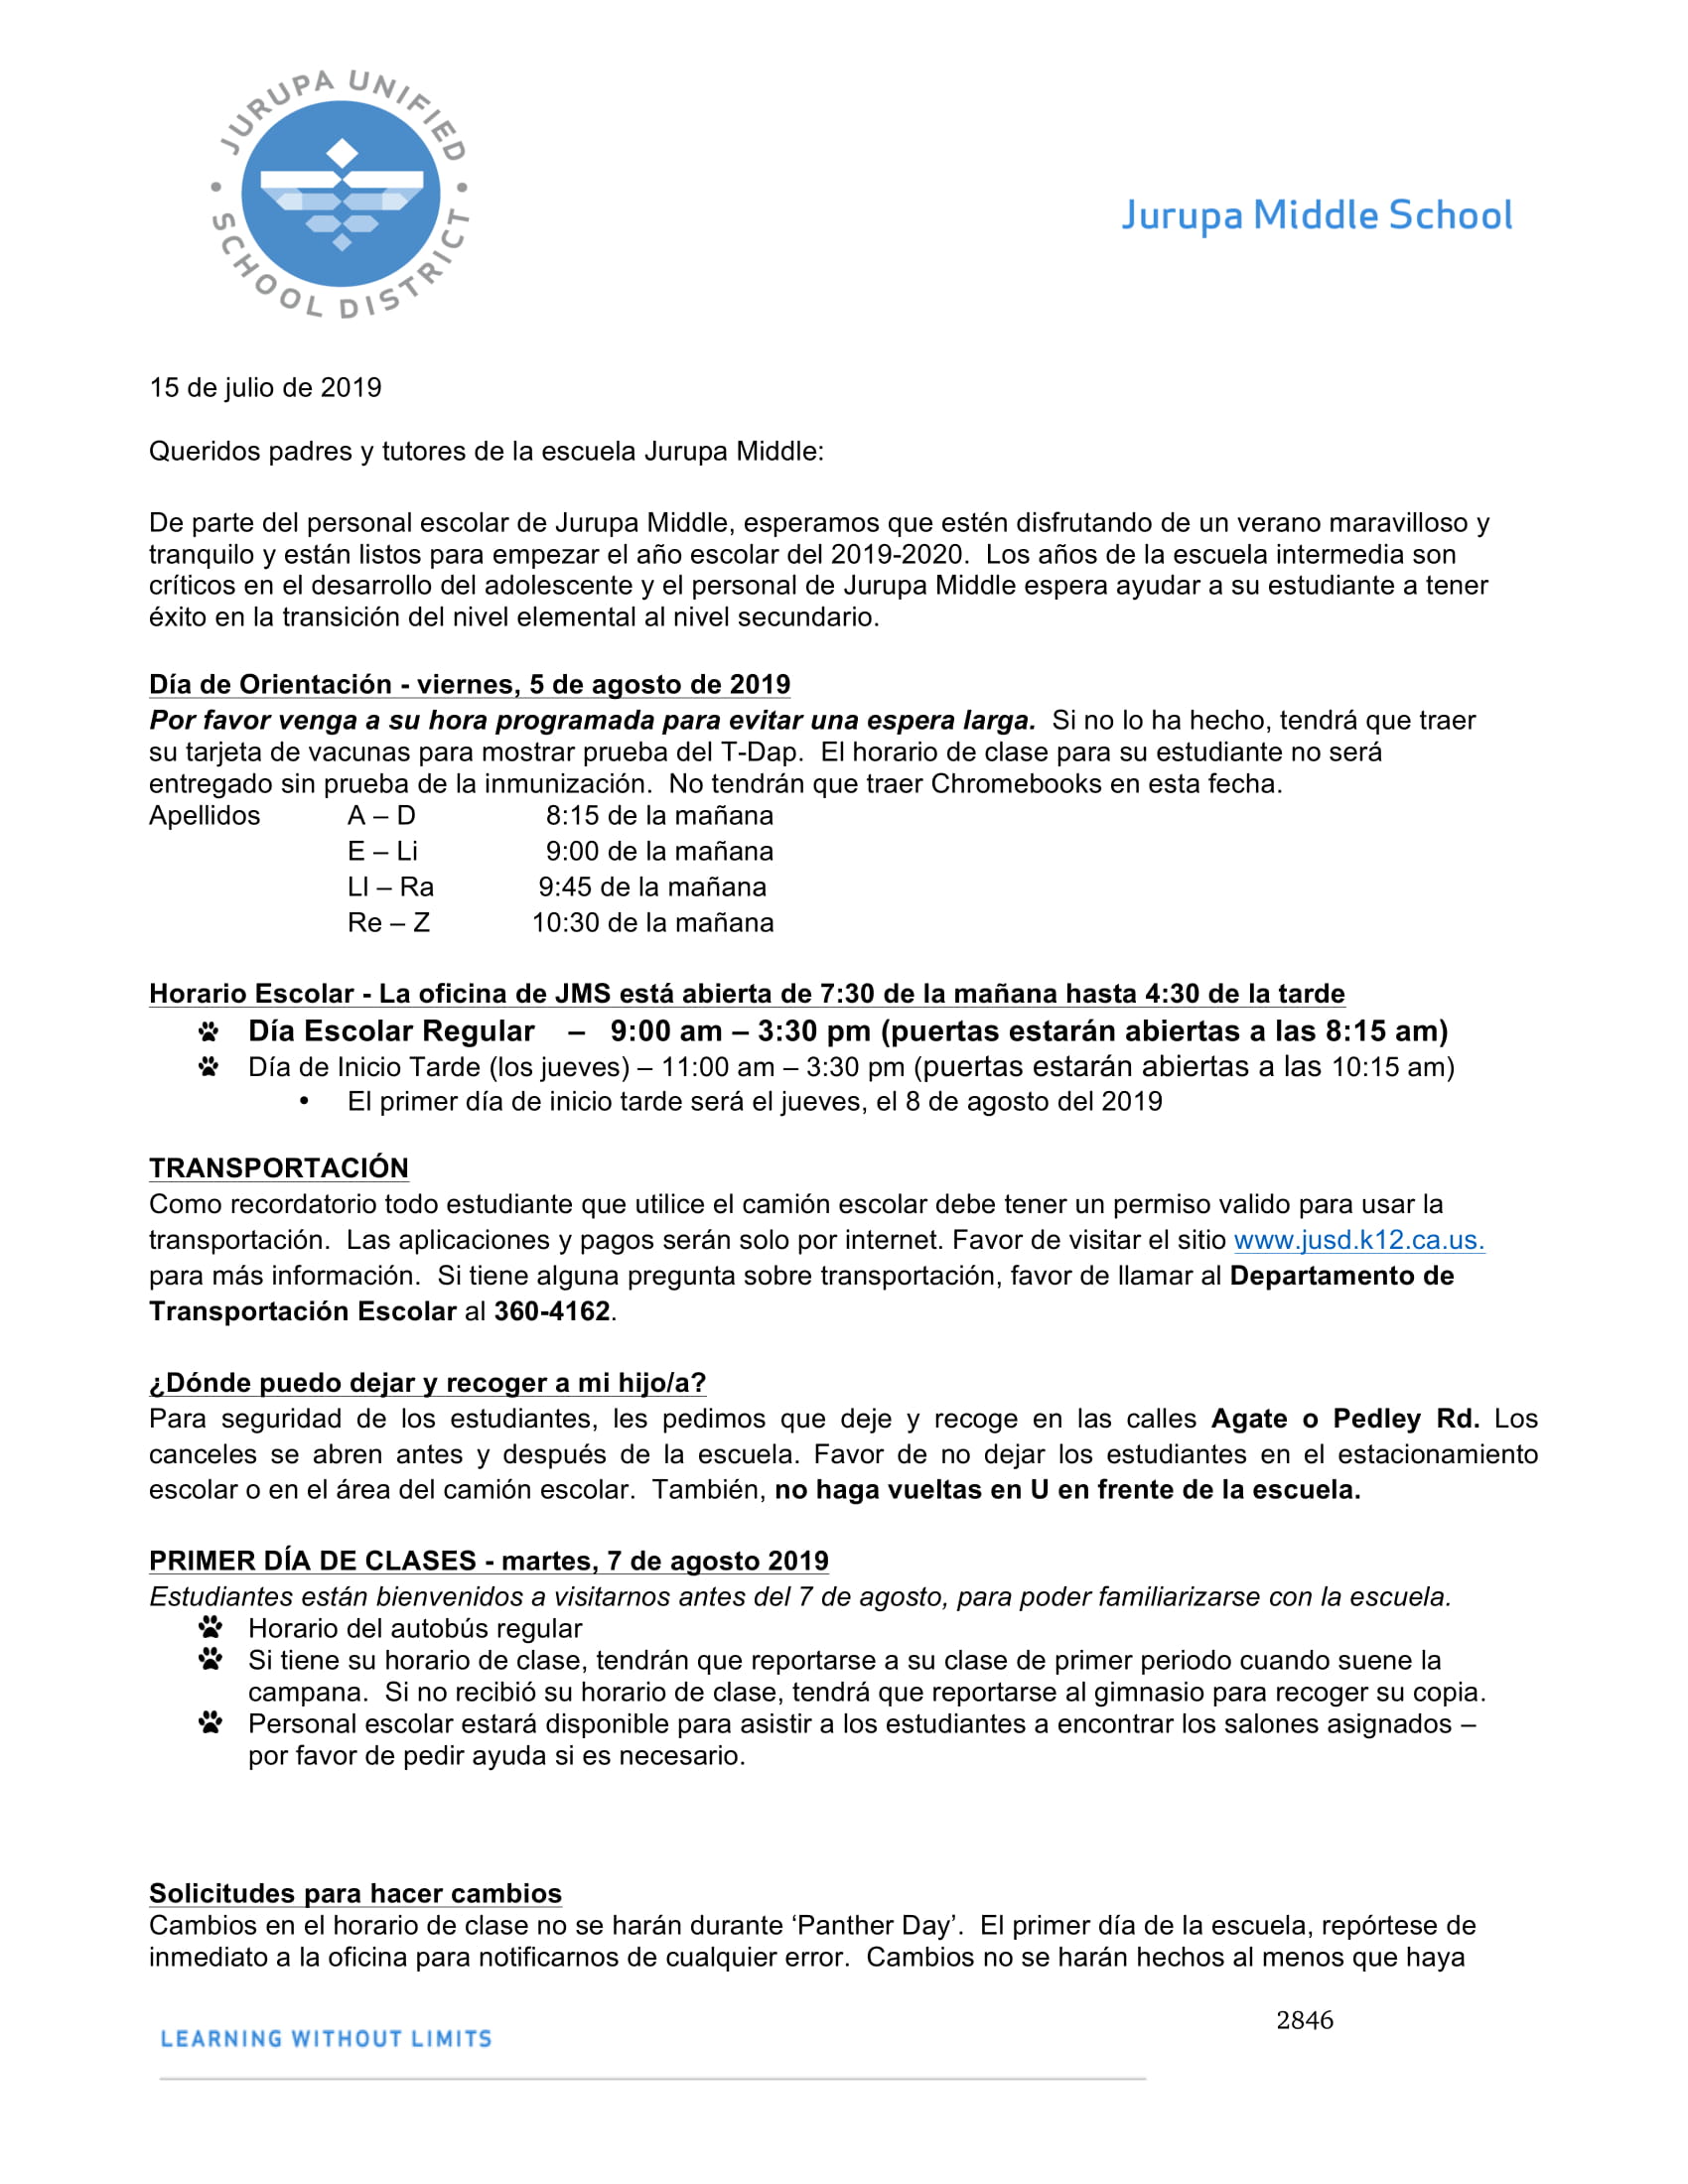 Student Welcome Letter sp 19-20-1.jpg